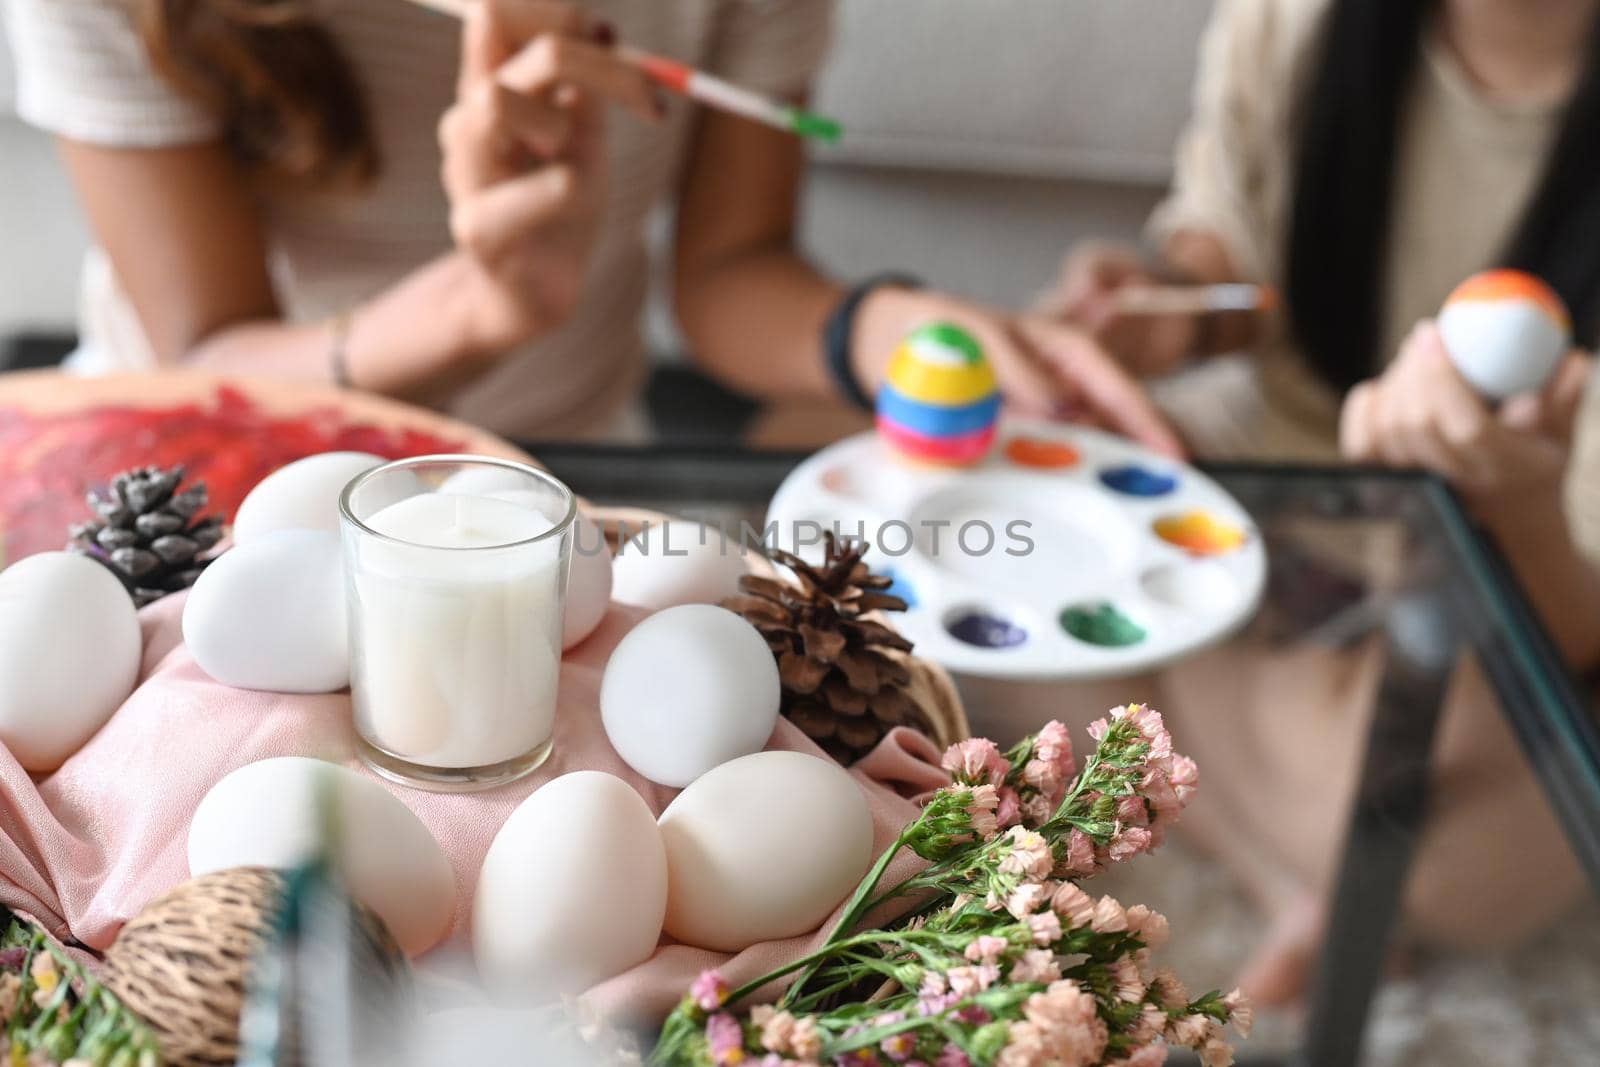 Wicker basket full of eggs and flowers on table in living room with mother and daughter painting Easter egg in background. by prathanchorruangsak